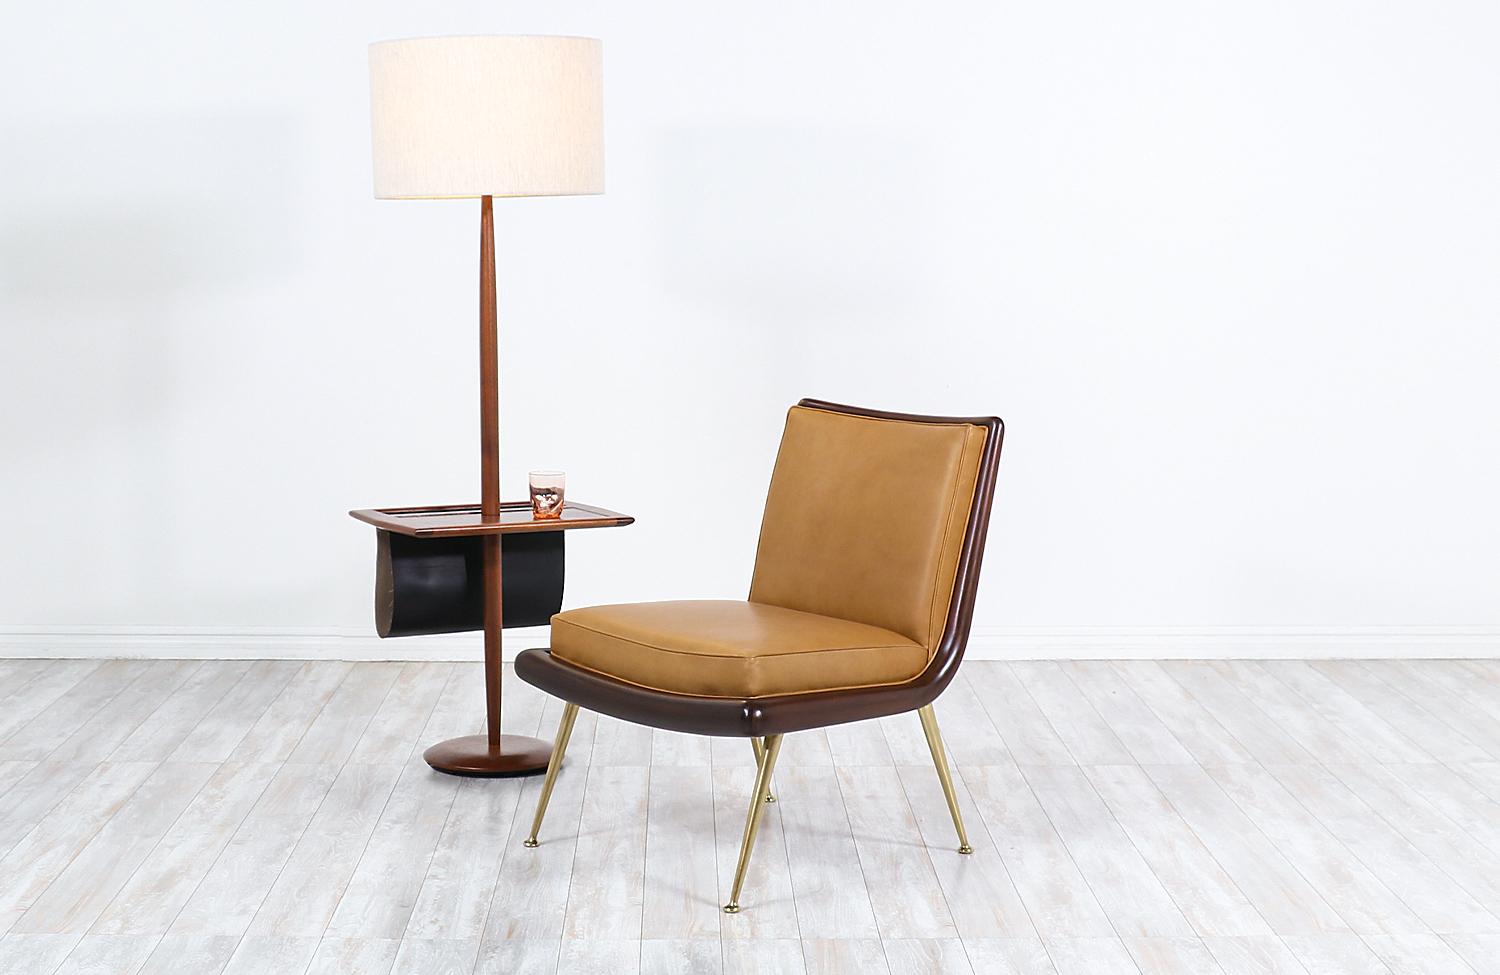 Mid-Century Modern floor lamp with side table and magazine holder by Laurel.


Dimensions:
58in H x 20in W x 15in D
Lamp shade: 12in H x 18in W
Side table height: 20.50in.